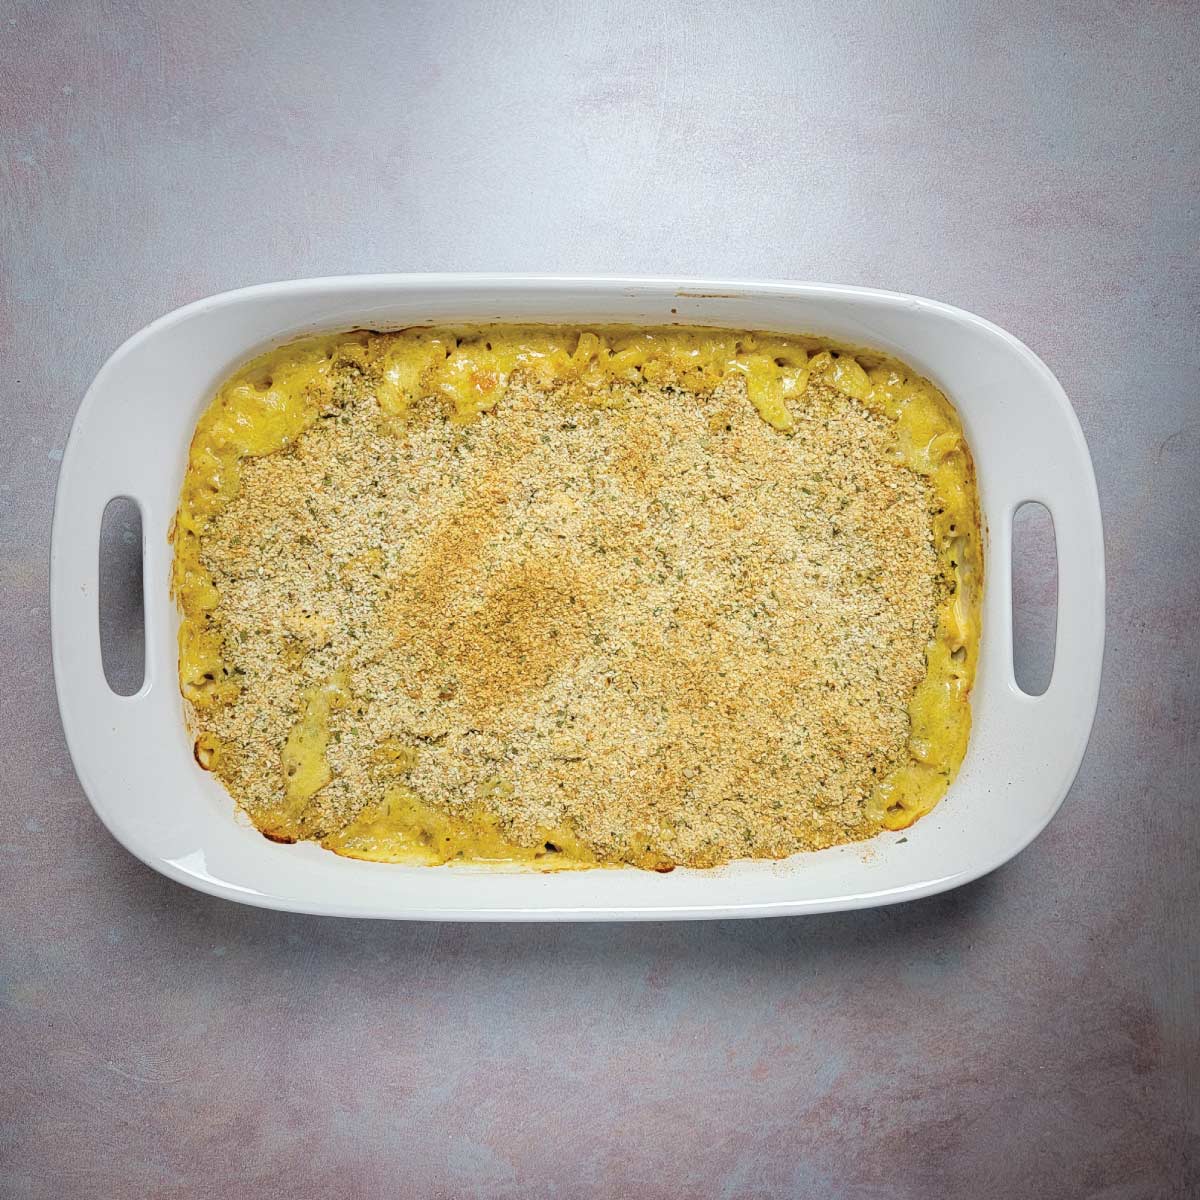 Huntington chicken casserole in a baking dish ready to serve.